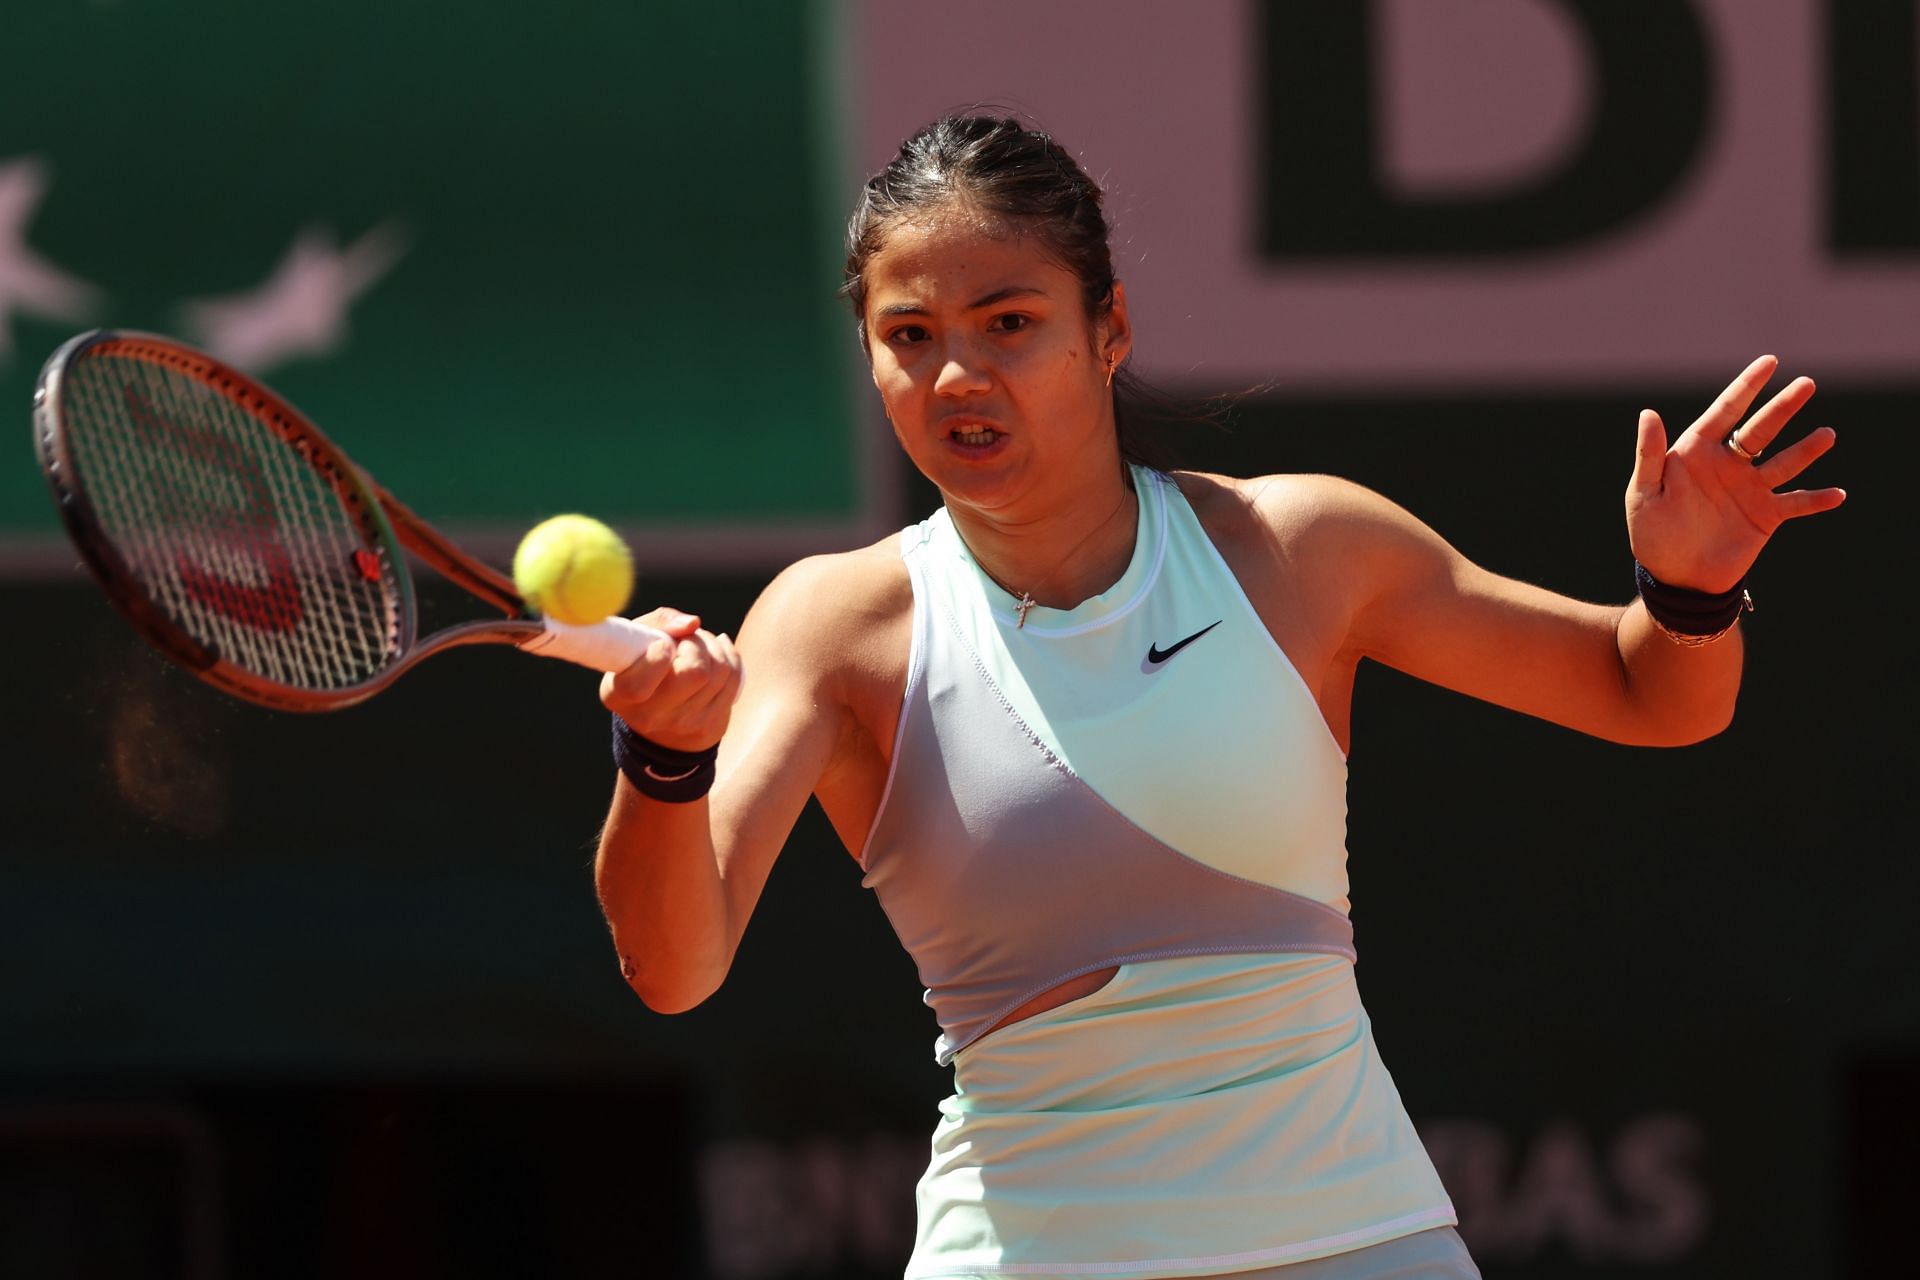 Raducanu suffered a second-round exit at the French Open